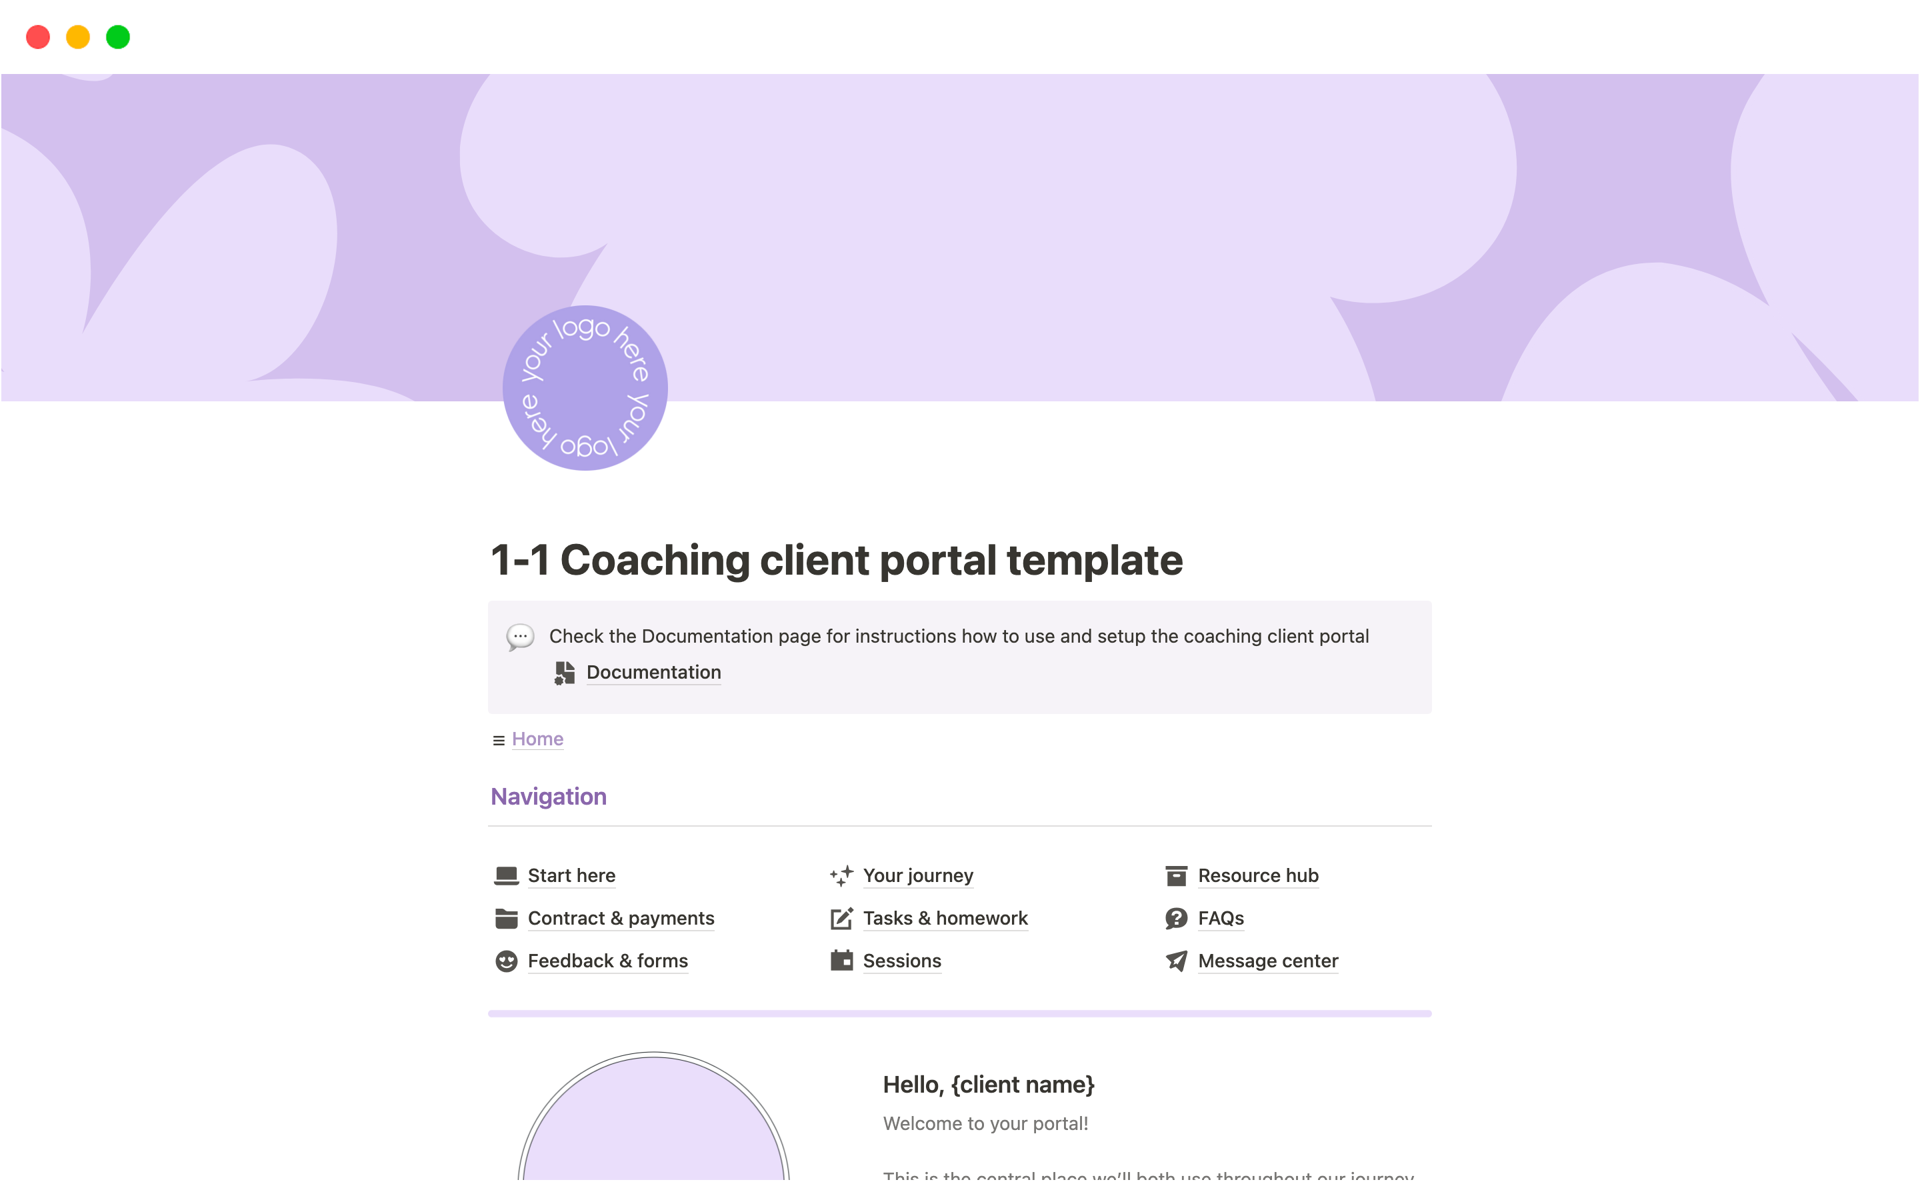 The 1-1 coaching client portal template is designed to streamline the process of working with coaching clients and provide a collaborative client experience.